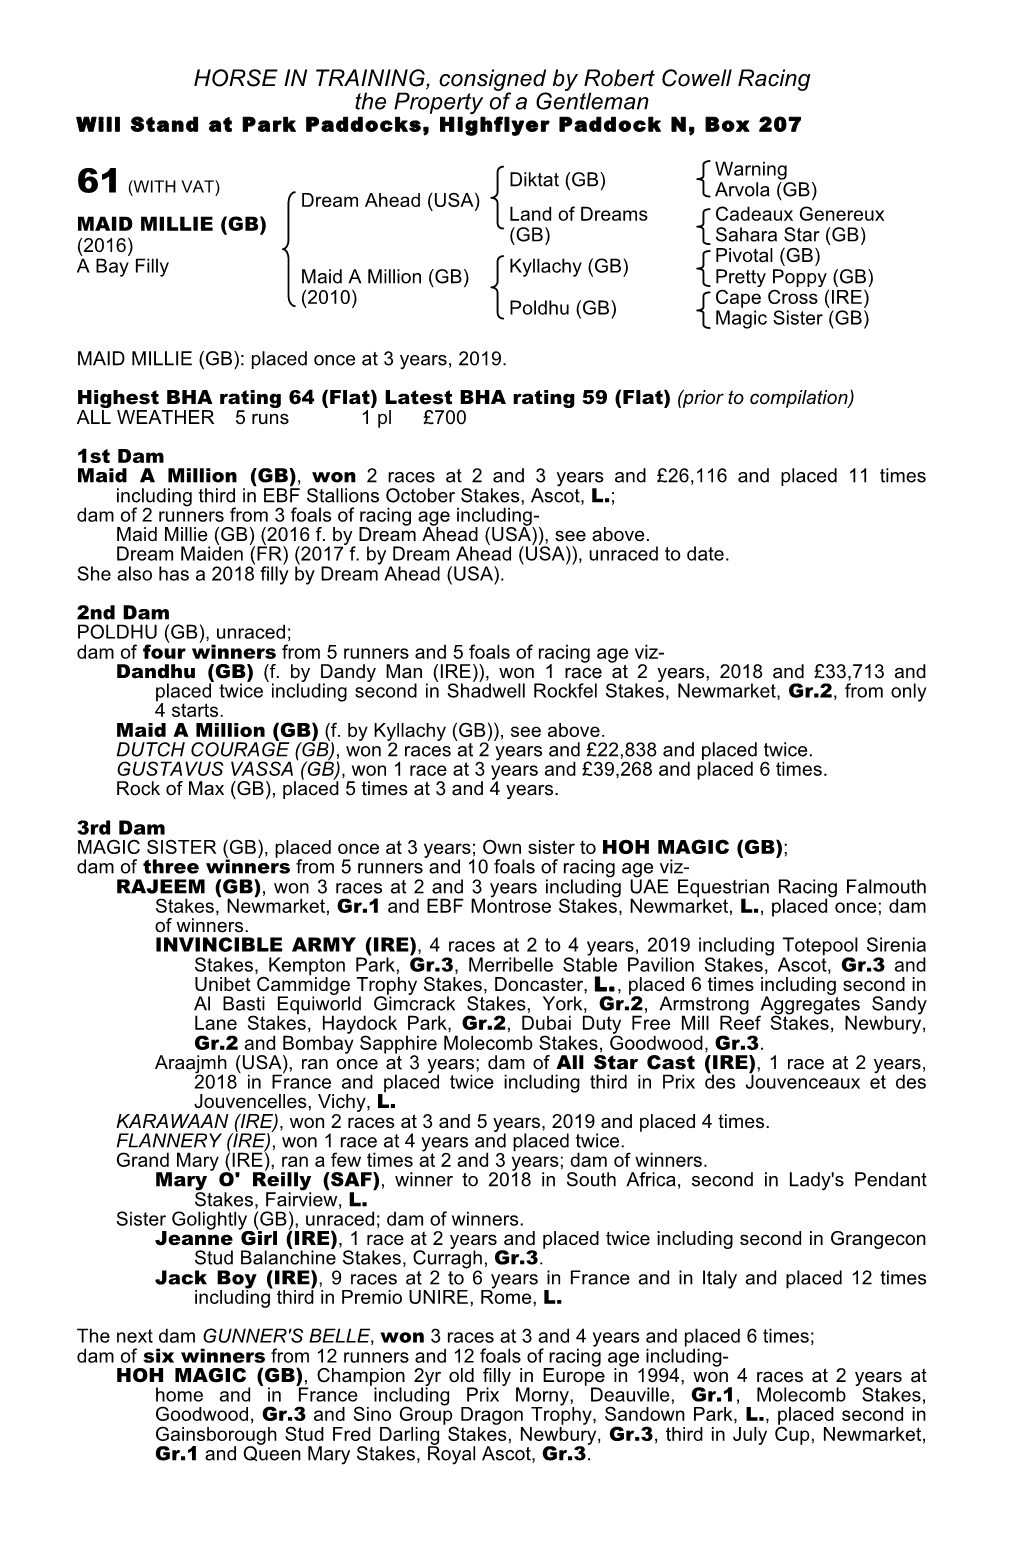 HORSE in TRAINING, Consigned by Robert Cowell Racing the Property of a Gentleman Will Stand at Park Paddocks, Highflyer Paddock N, Box 207